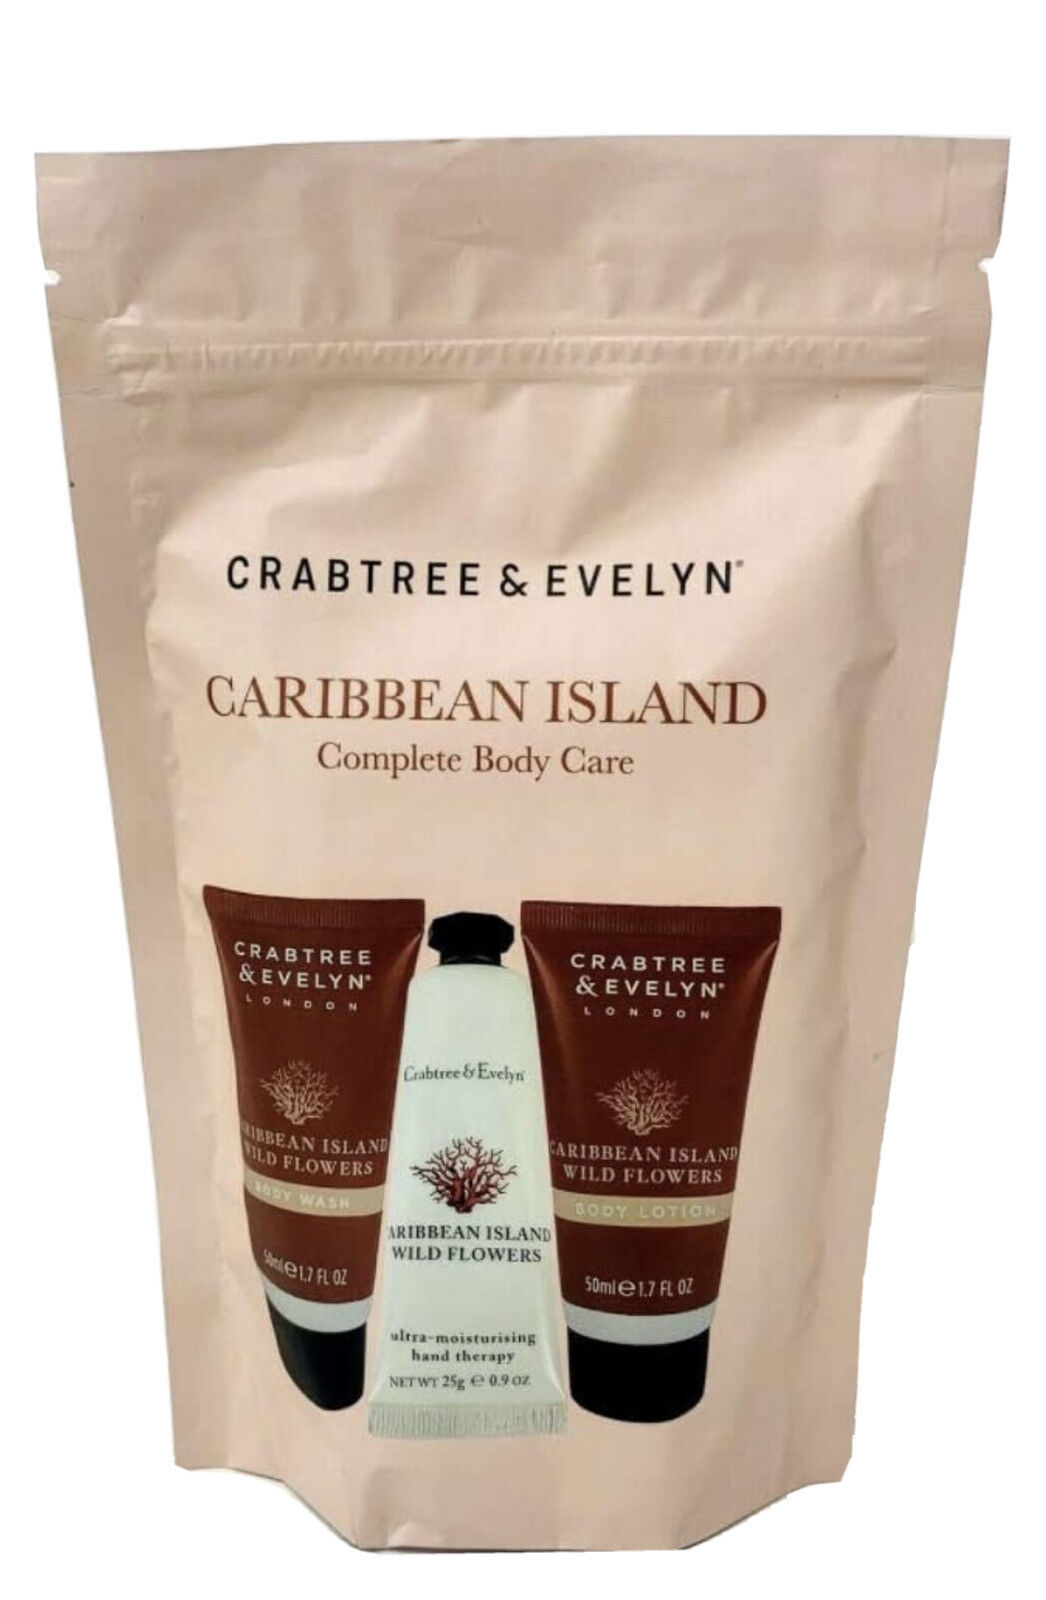 CRABTREE & EVELYN CARIBBEAN ISLAND BODY CARE SET WASH, LOTION, HAND THERAPY NEW - $29.69